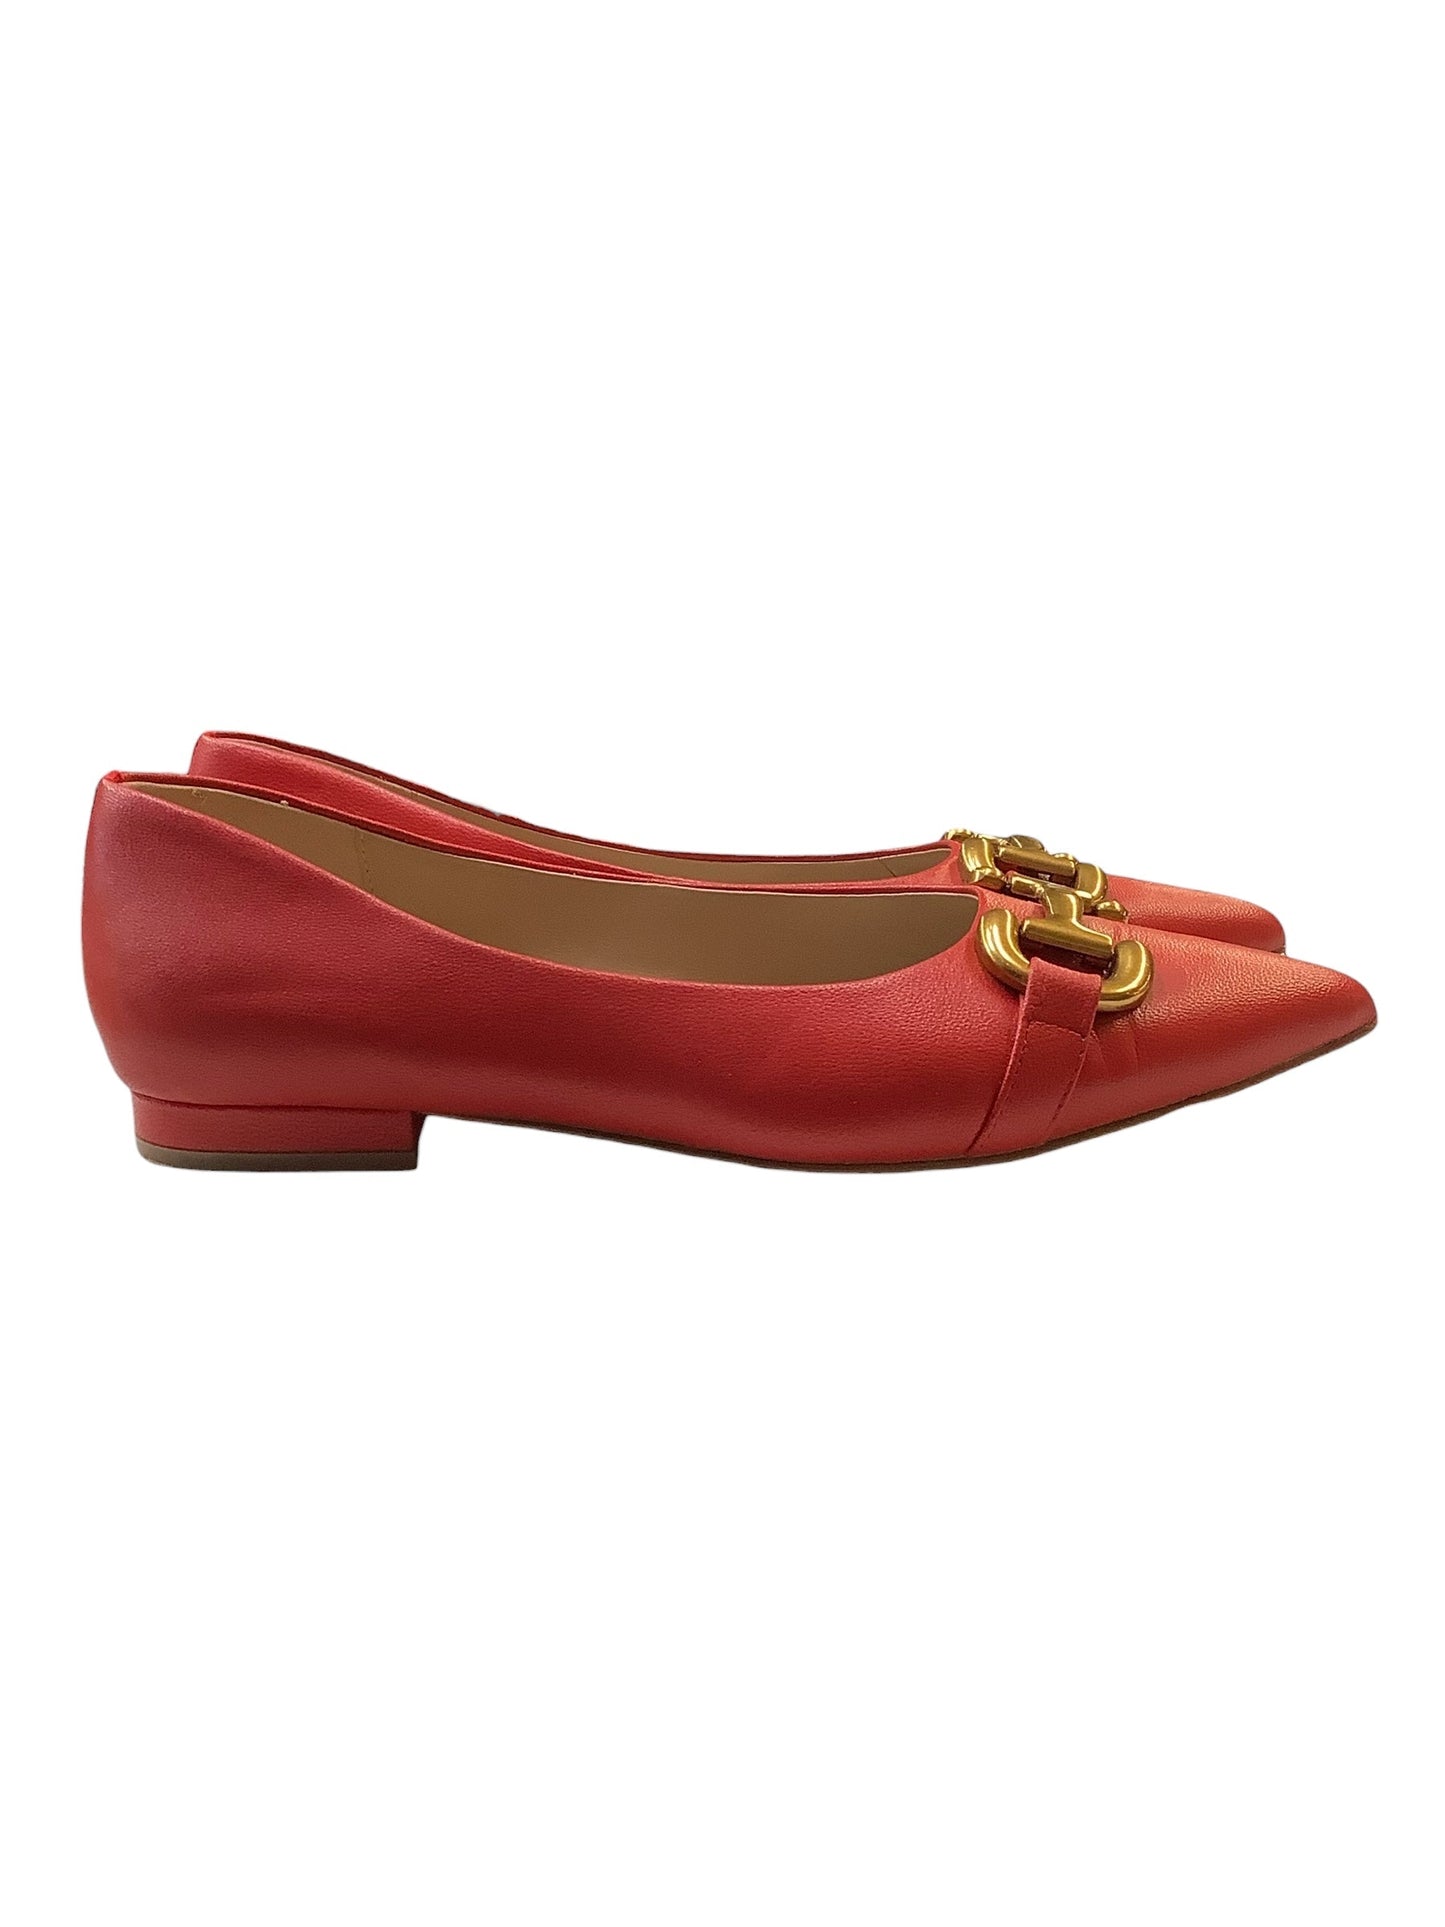 Red Shoes Flats Boden, Size 7